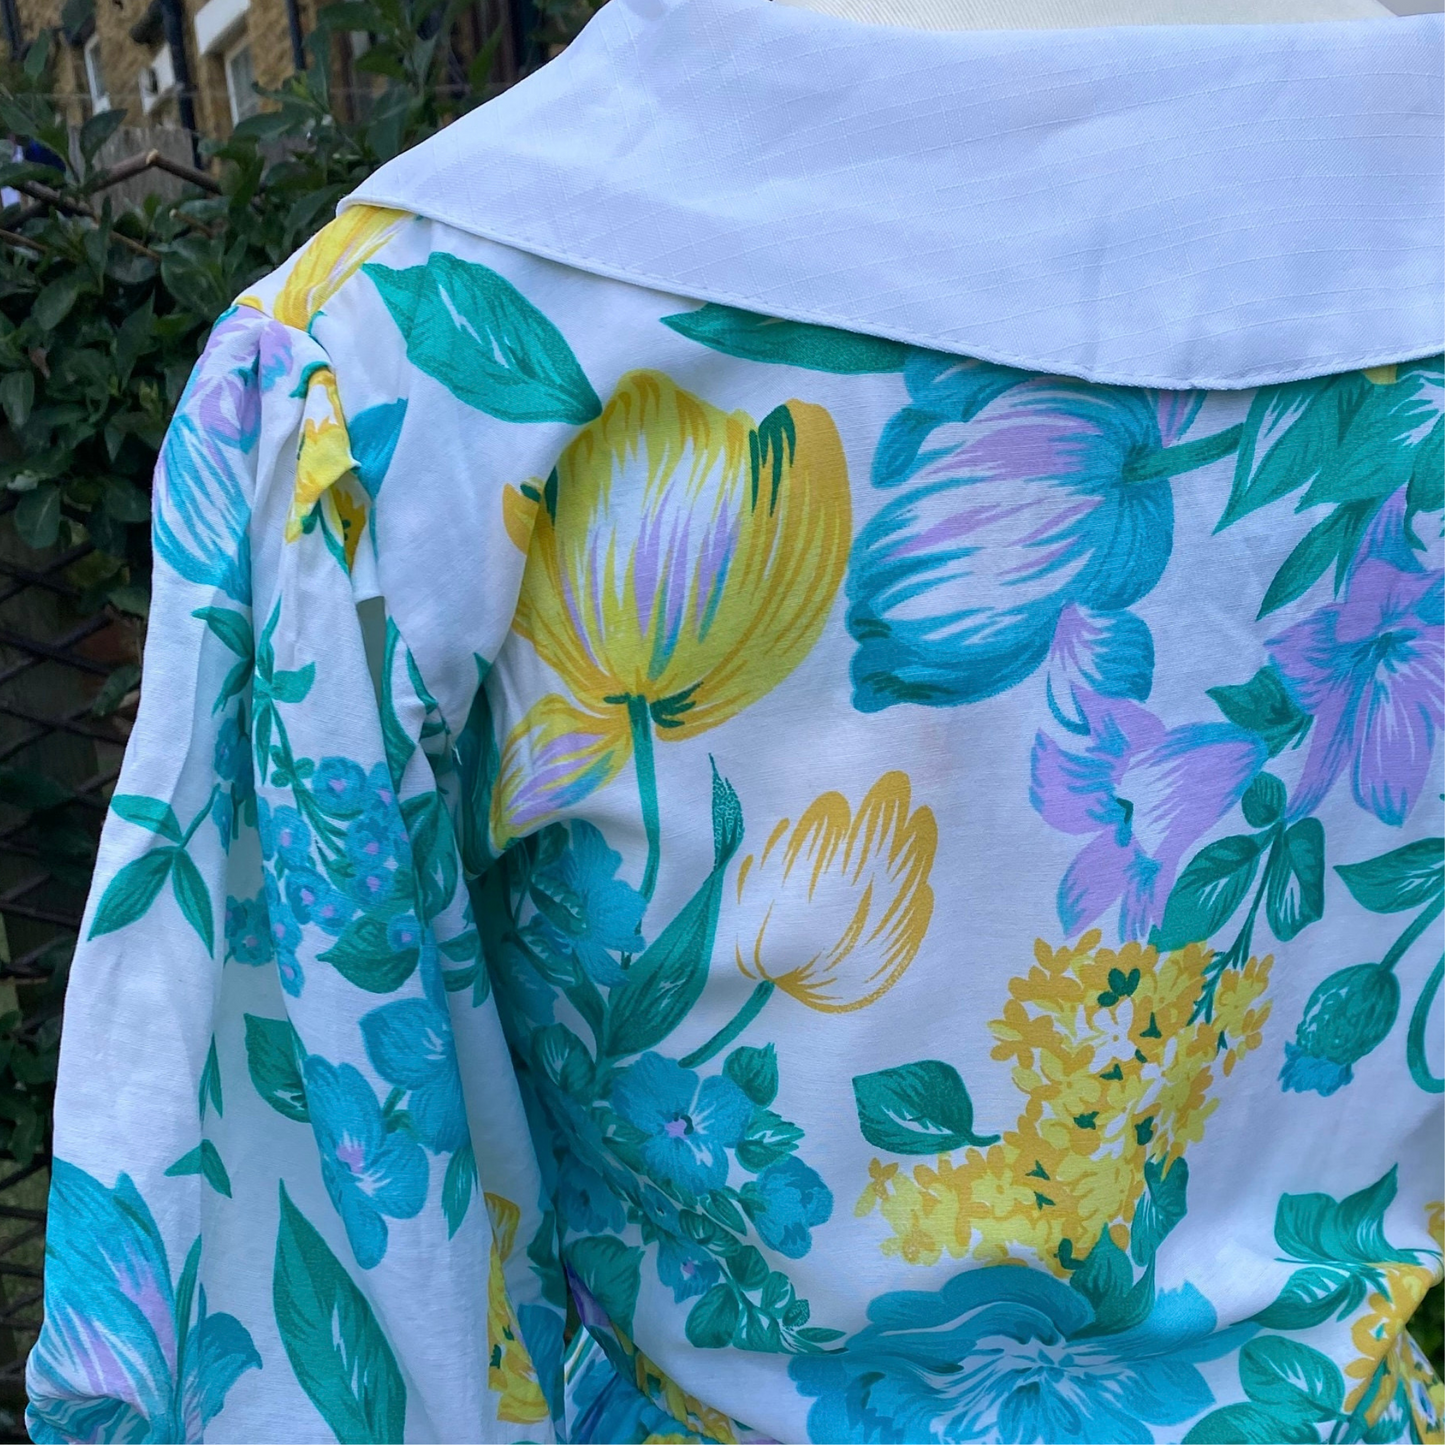 80s white, yellow and green cotton floral dress with puffed sleeves. Approx UK size 10-12